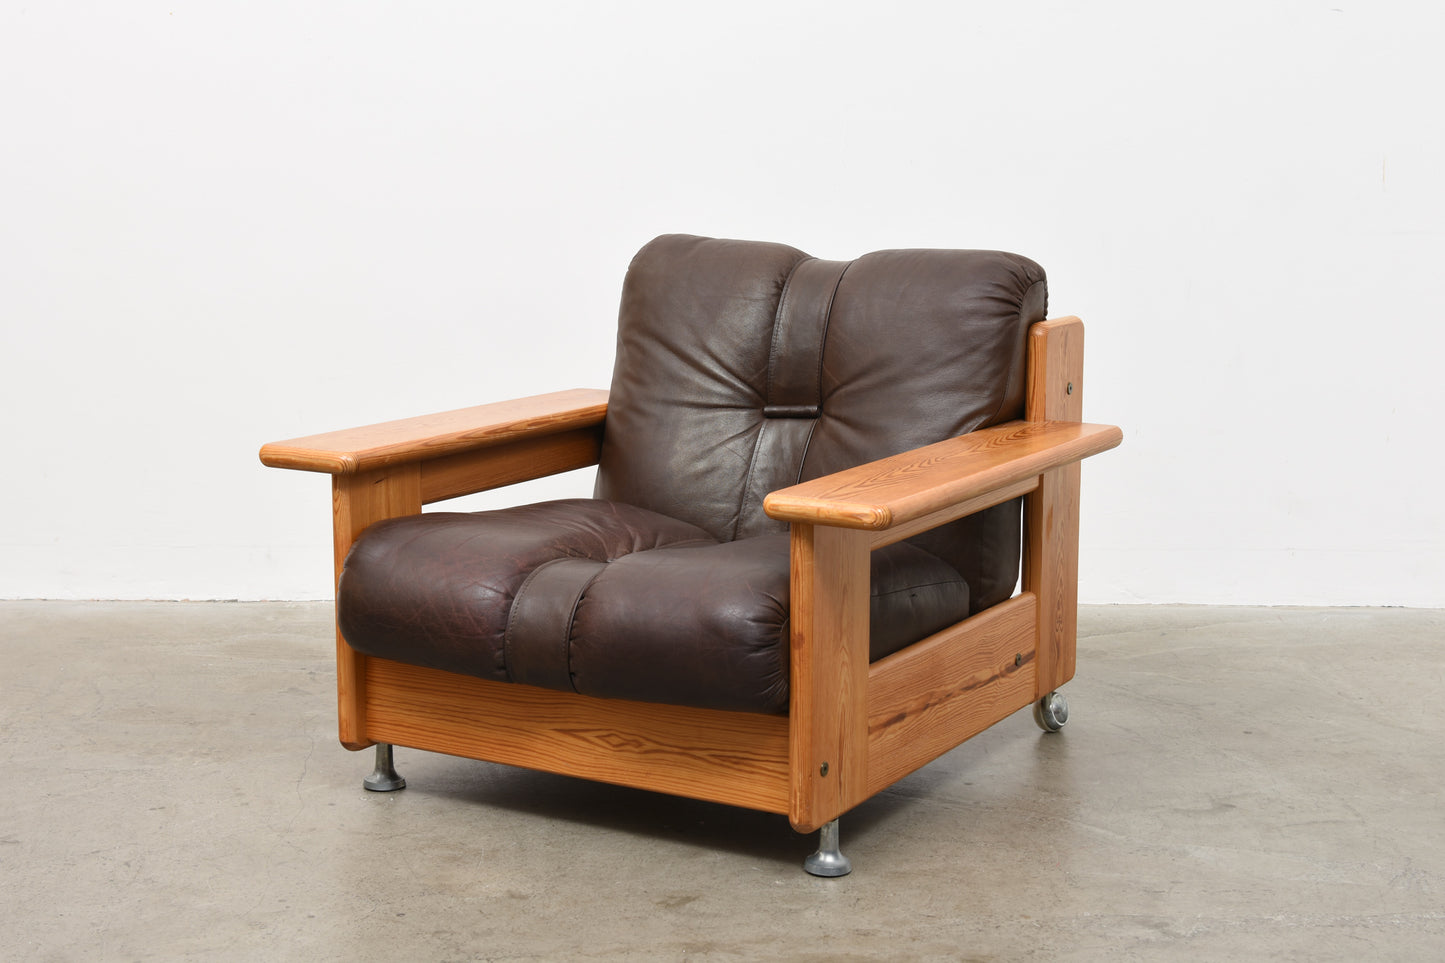 1970s Finnish pine + leather lounger